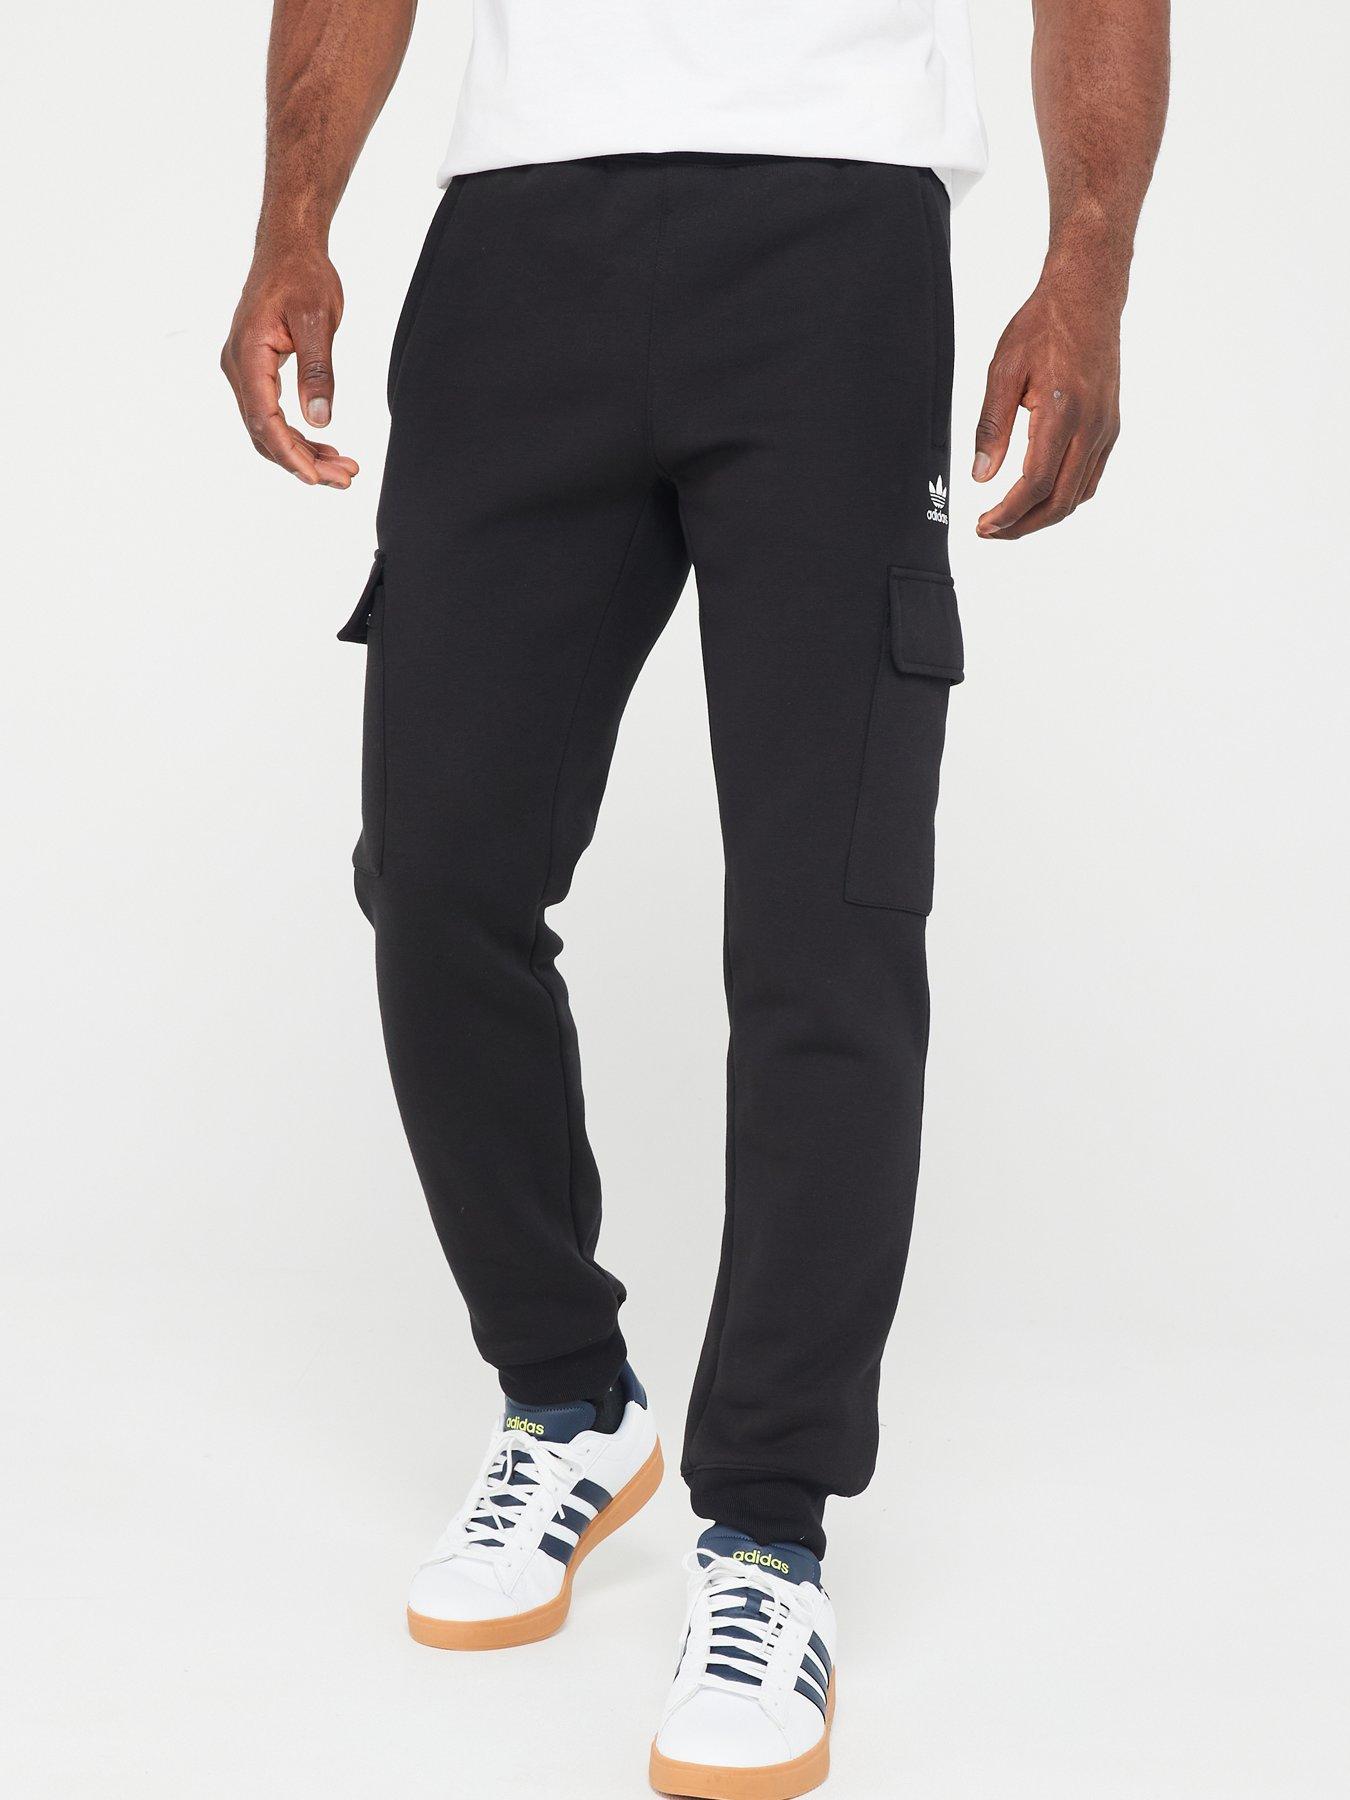 Trousers, Mens sports clothing, Sports & leisure